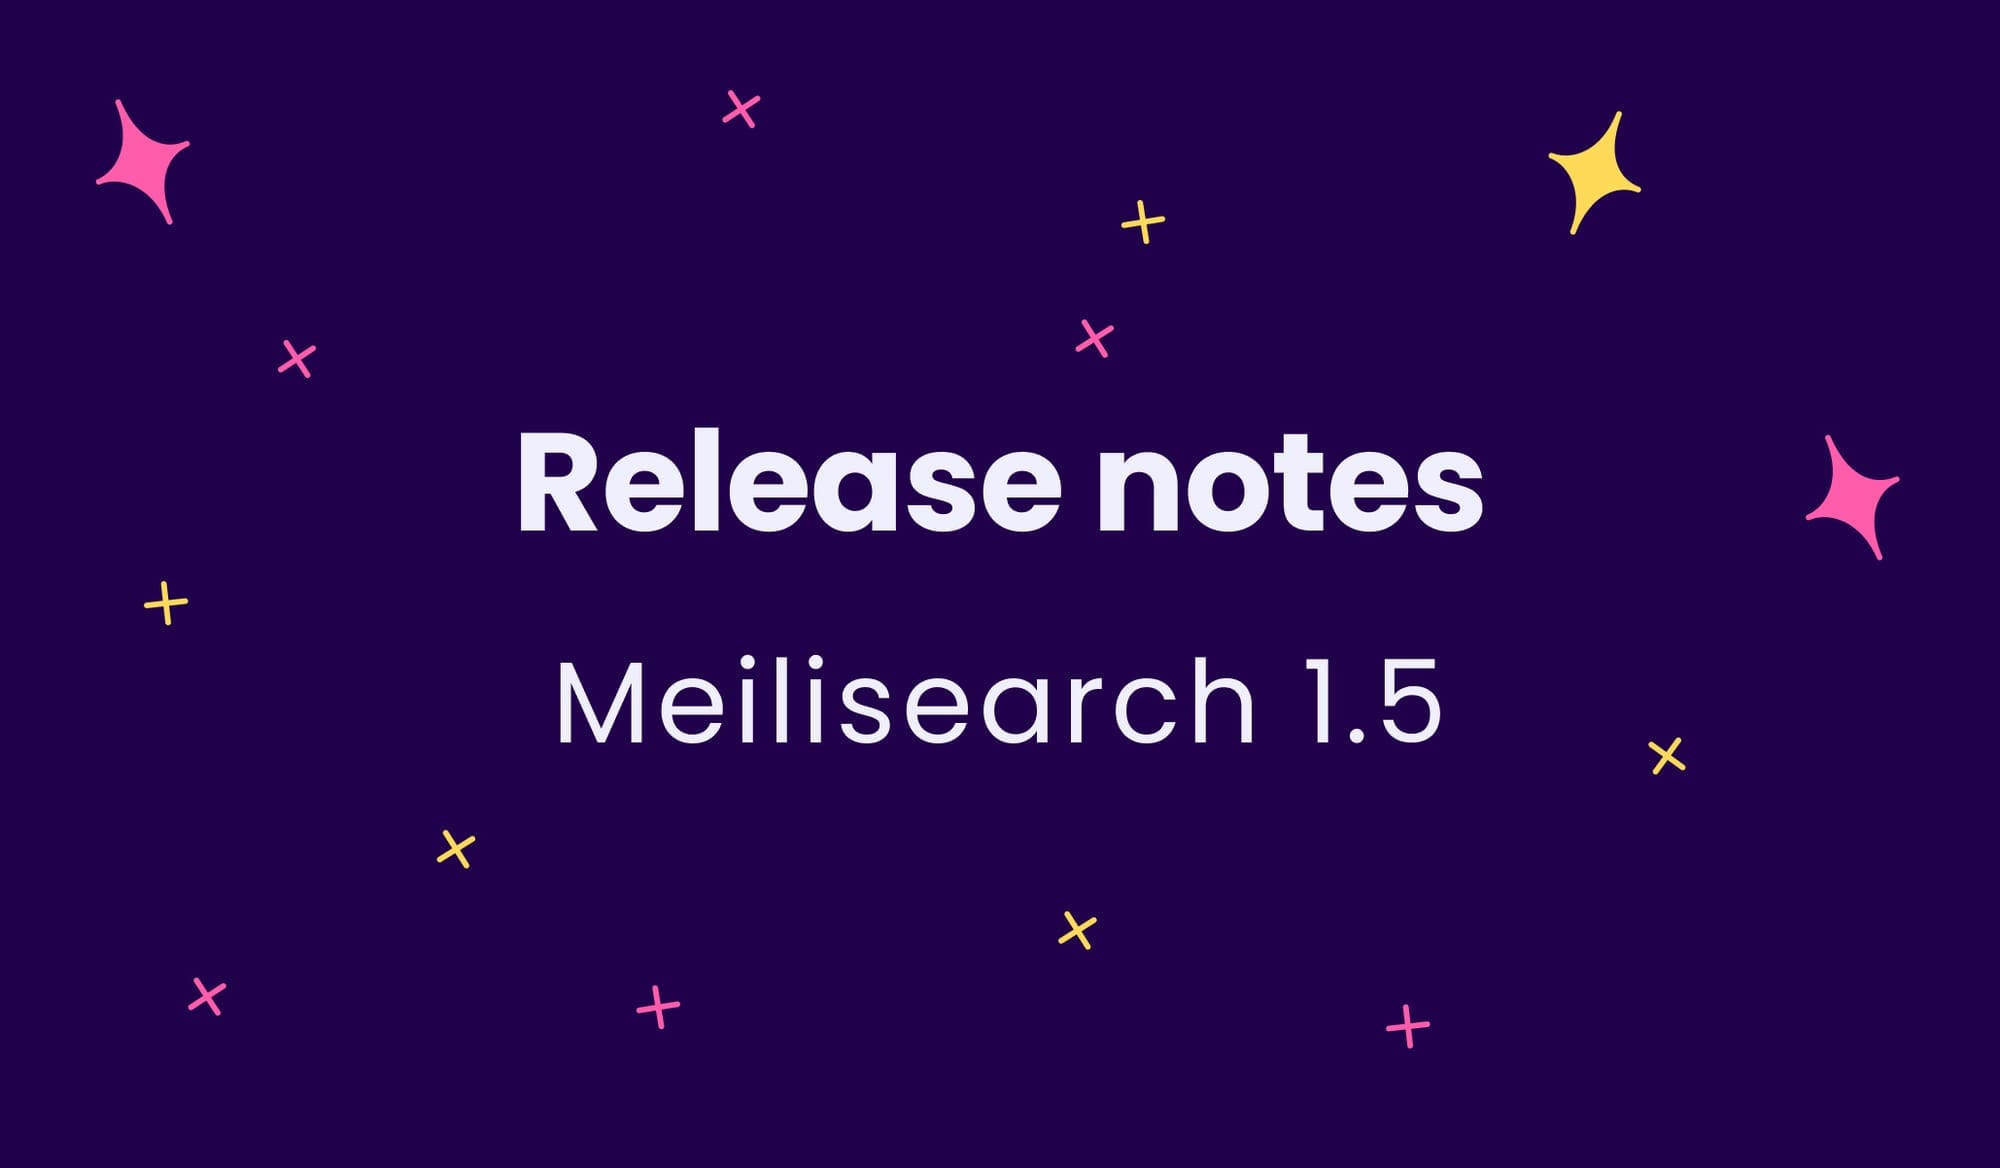 Meilisearch 1.5 release notes